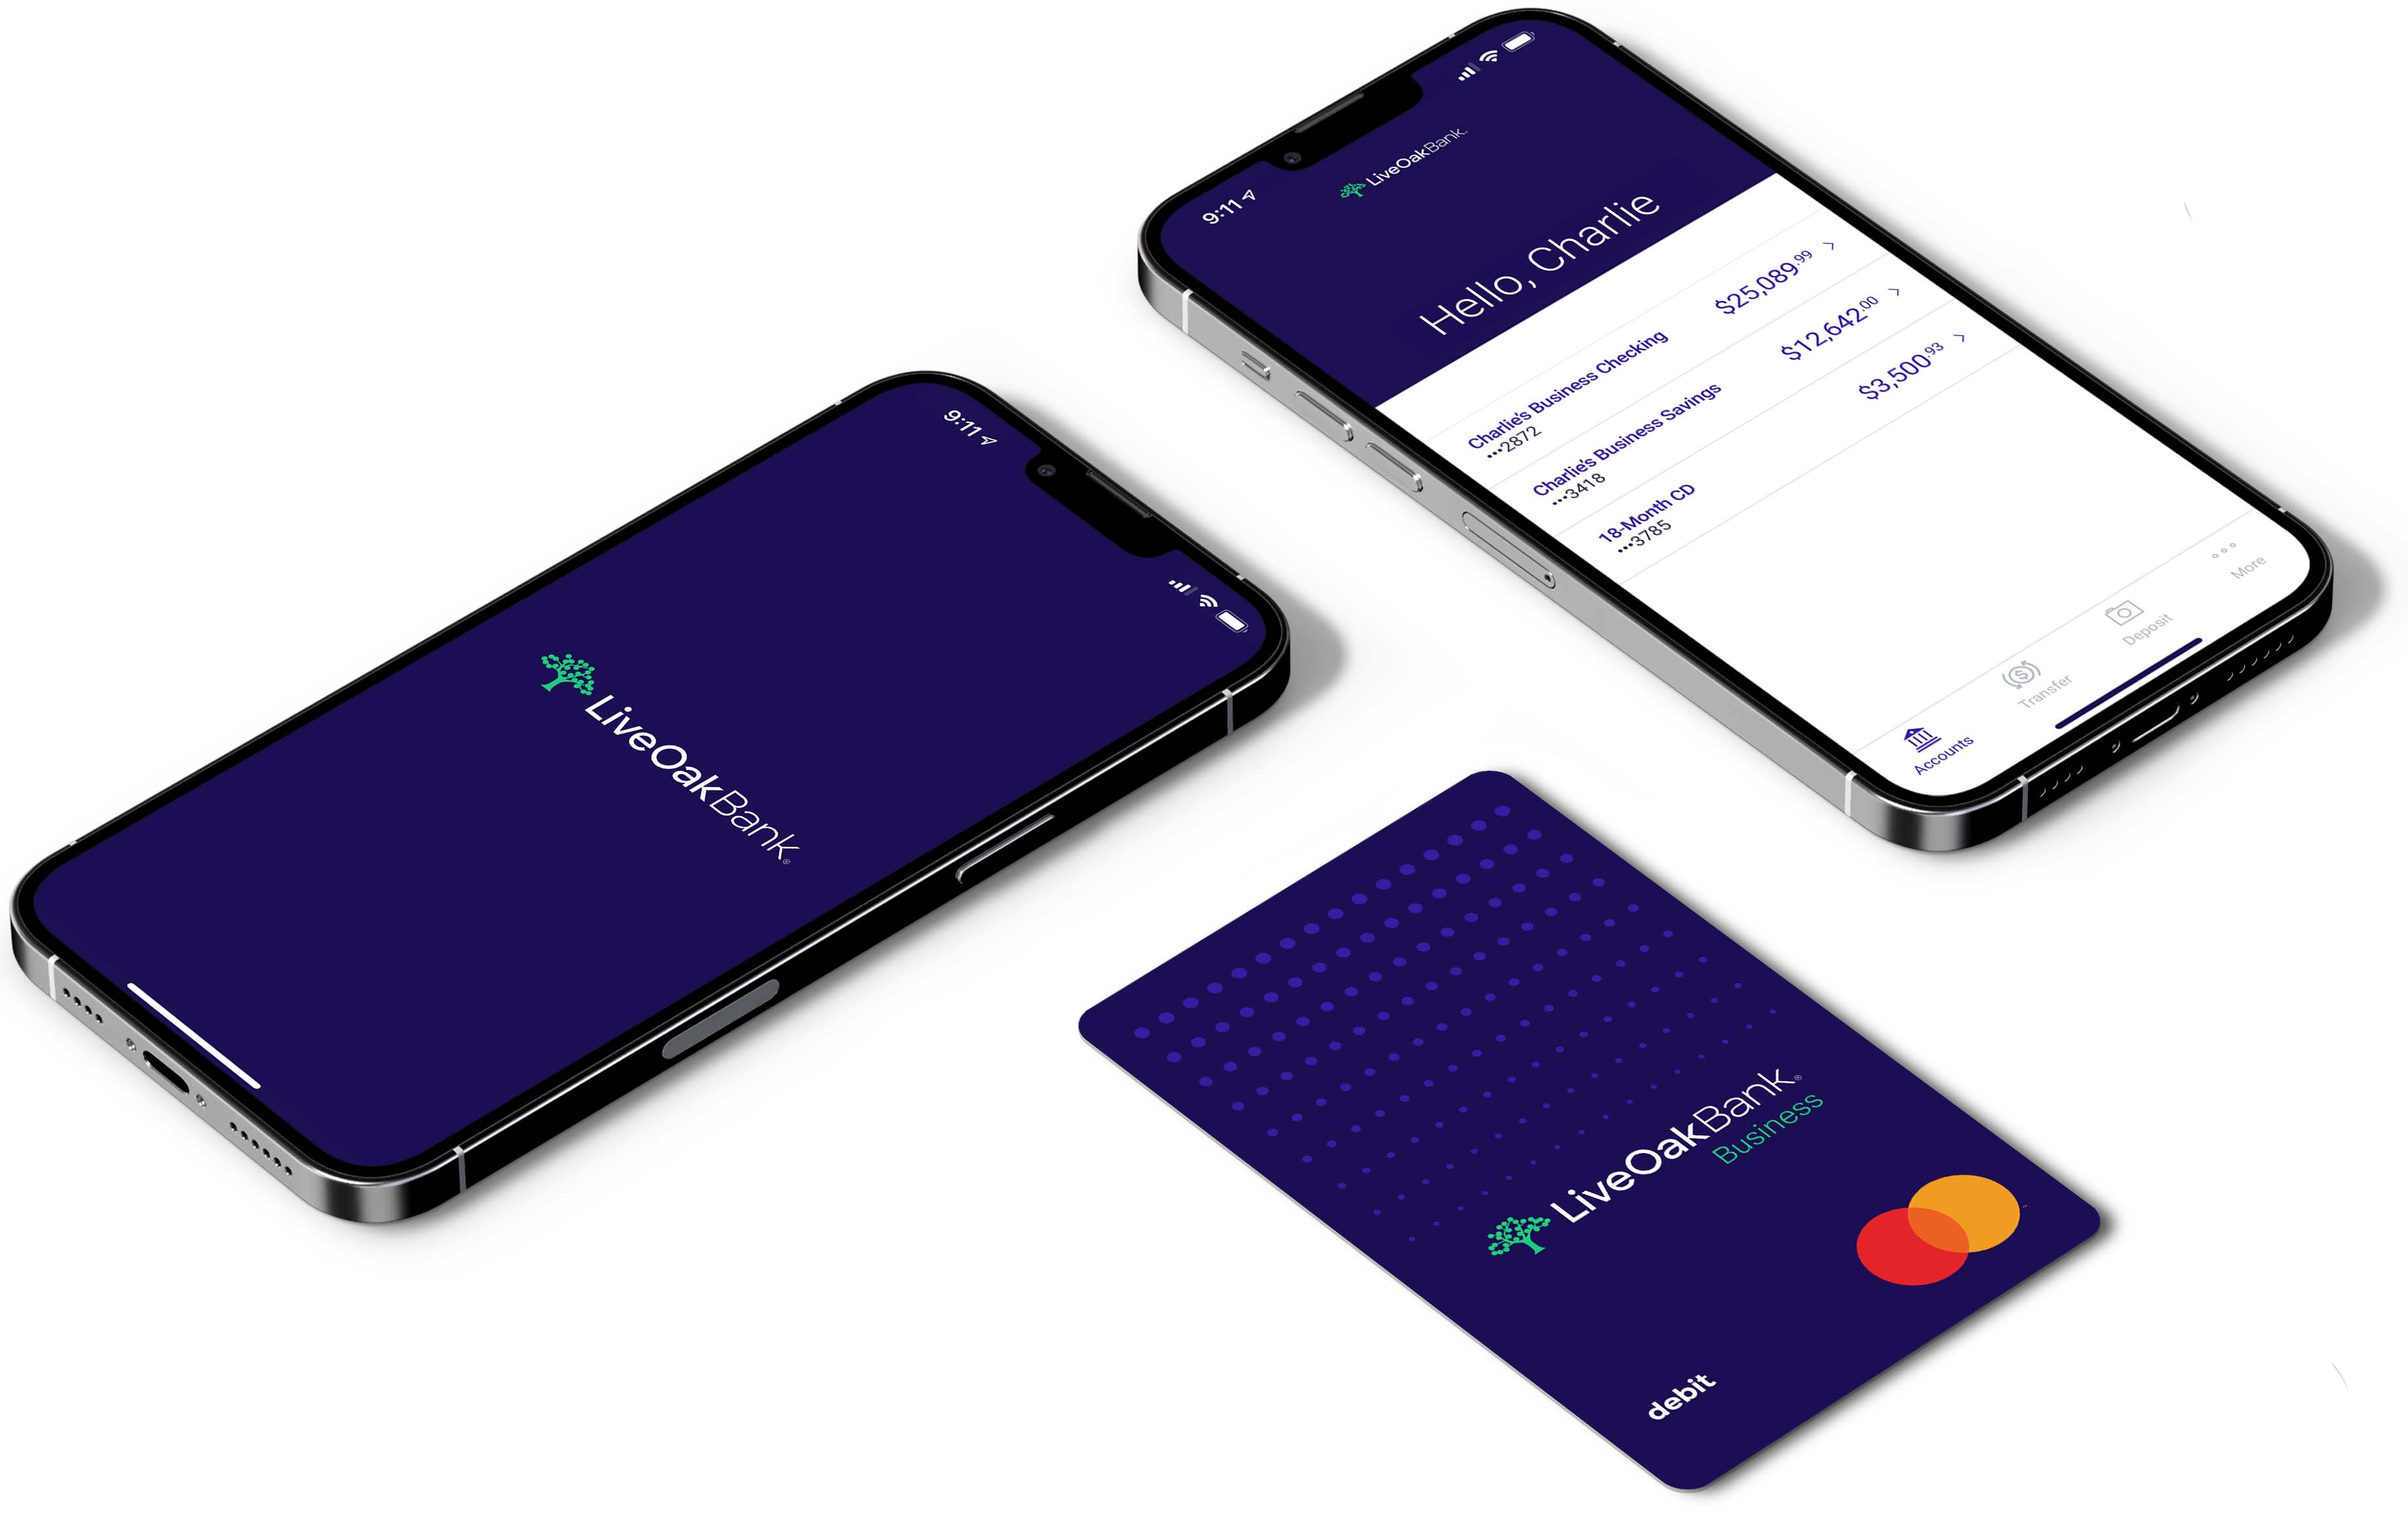 small-business-checking-account-bank-card-mobile-app-1